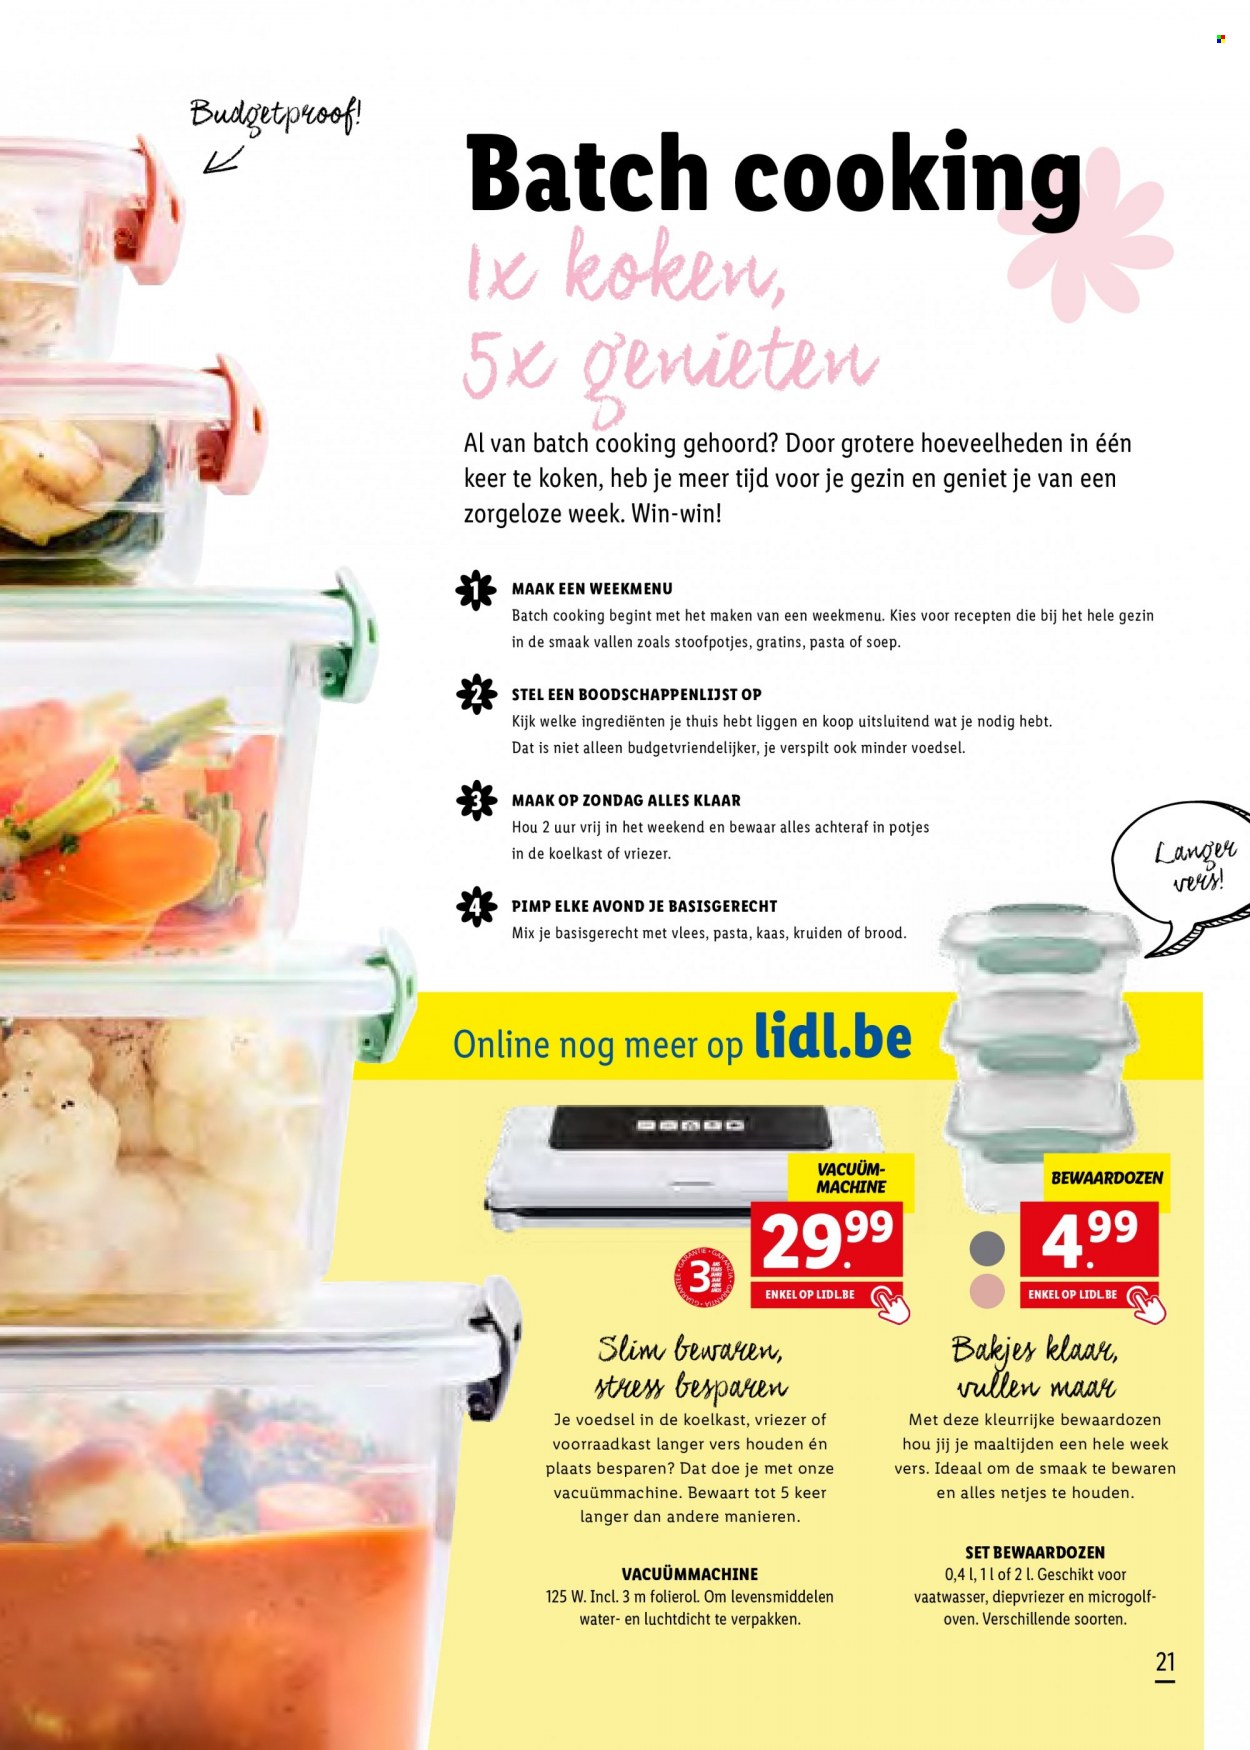 Catalogue Lidl. Page 21.